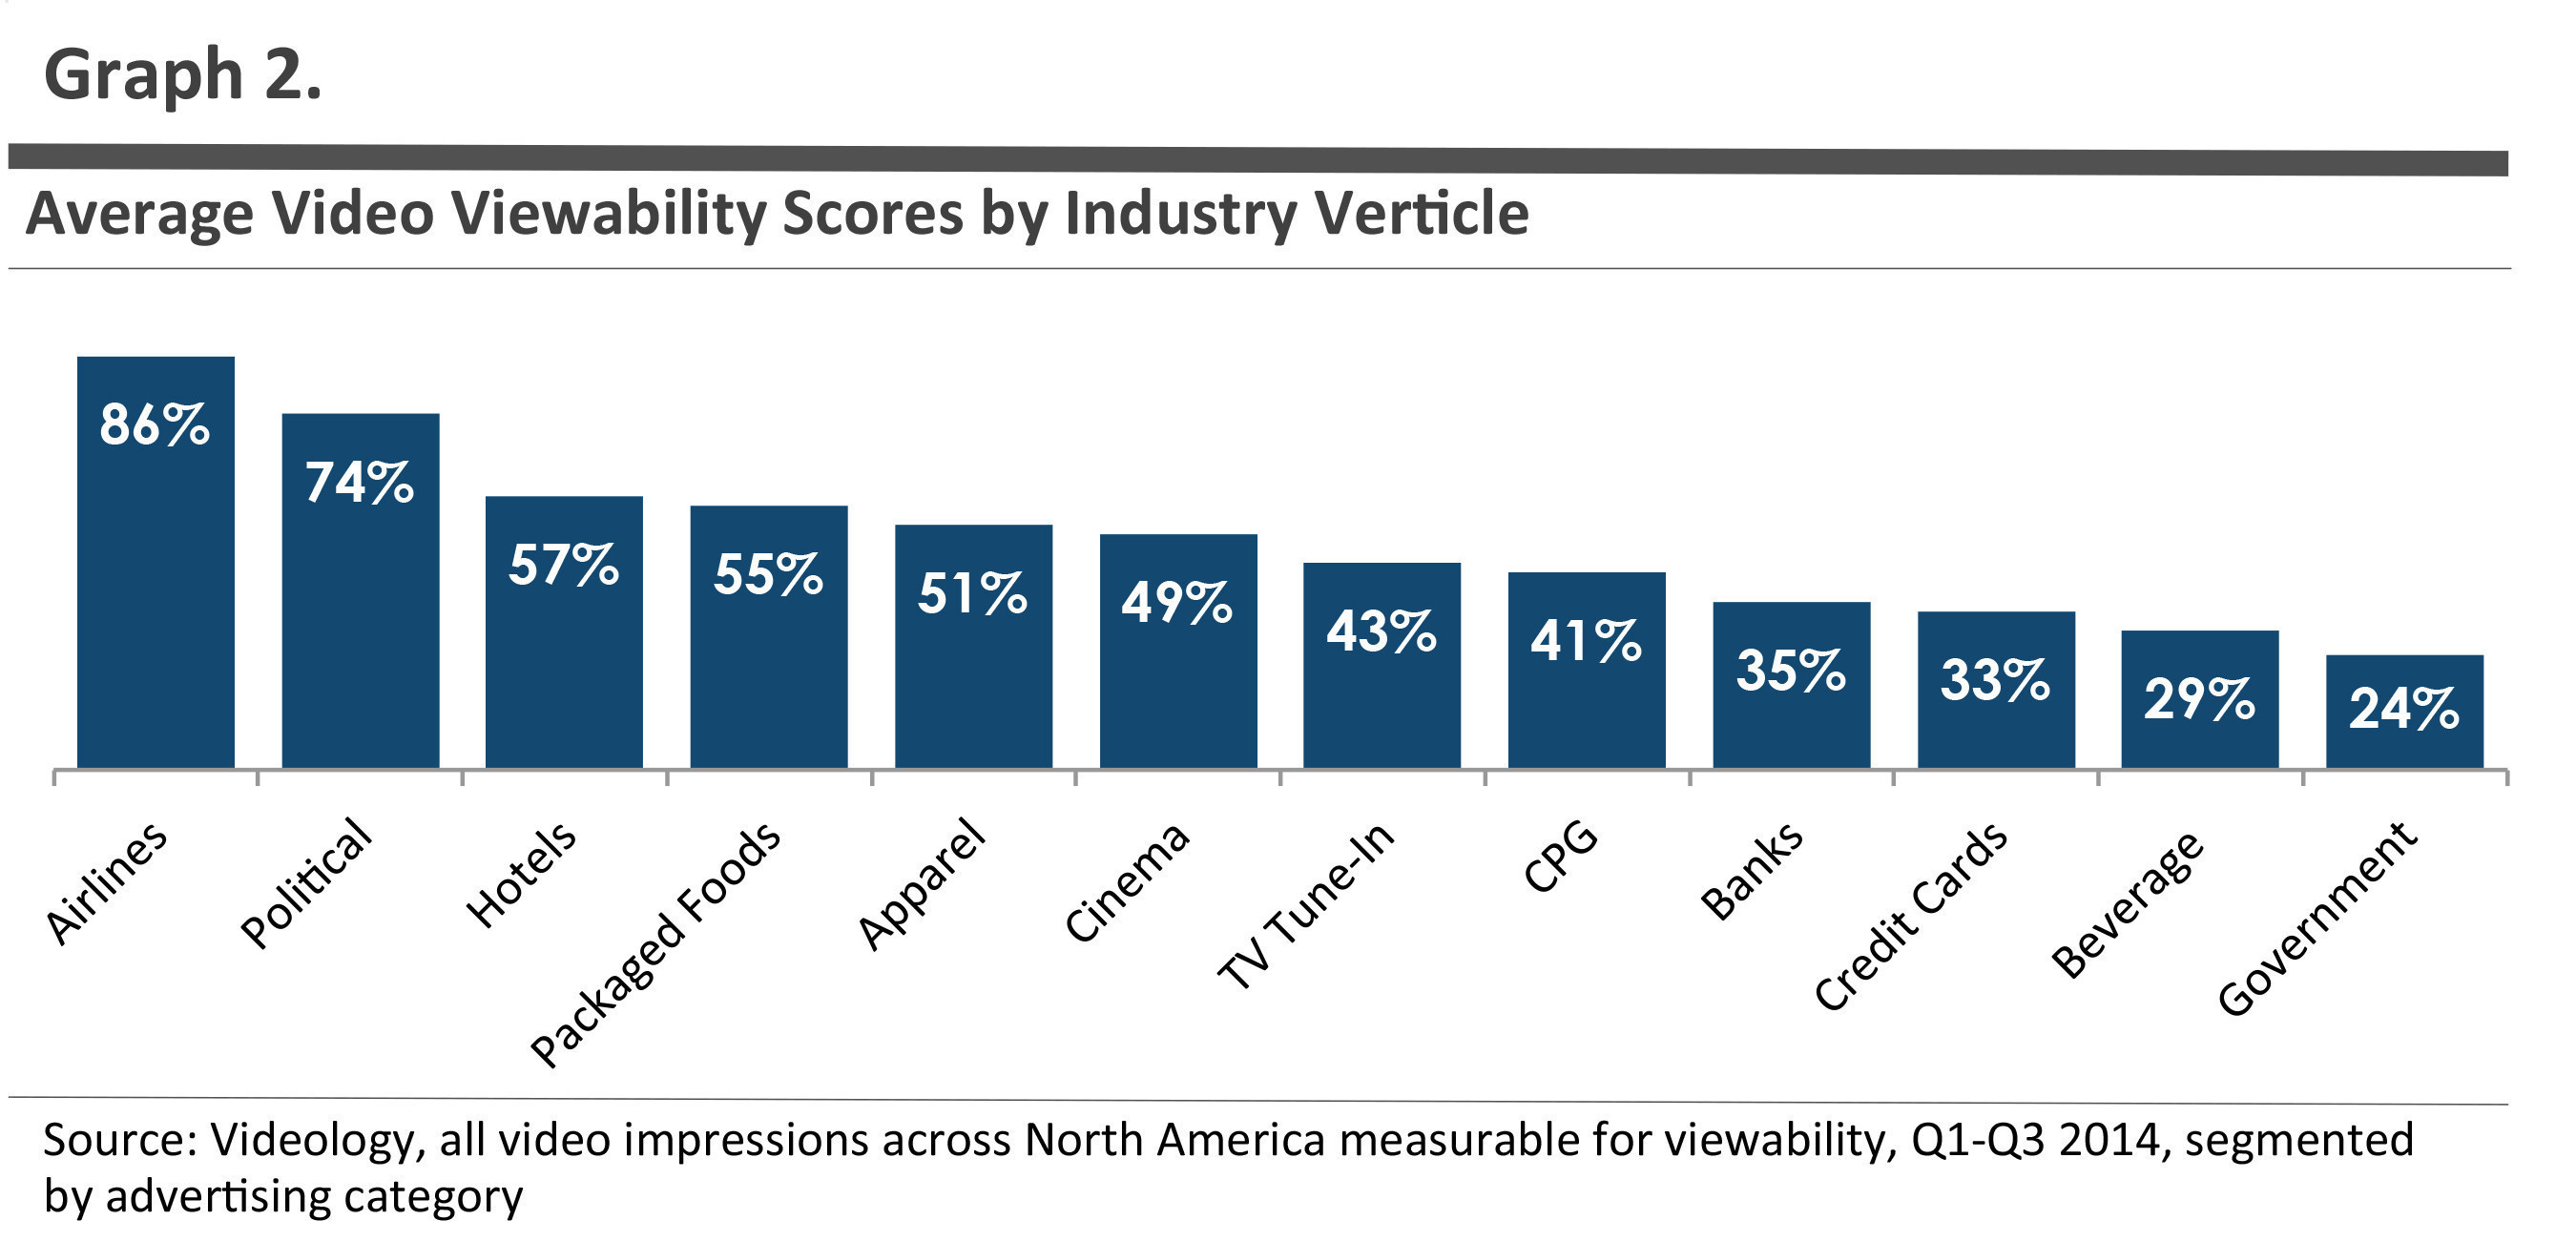 Certain key ad categories perform significantly better than others in terms of viewability ranking across the same premium inventory sources.